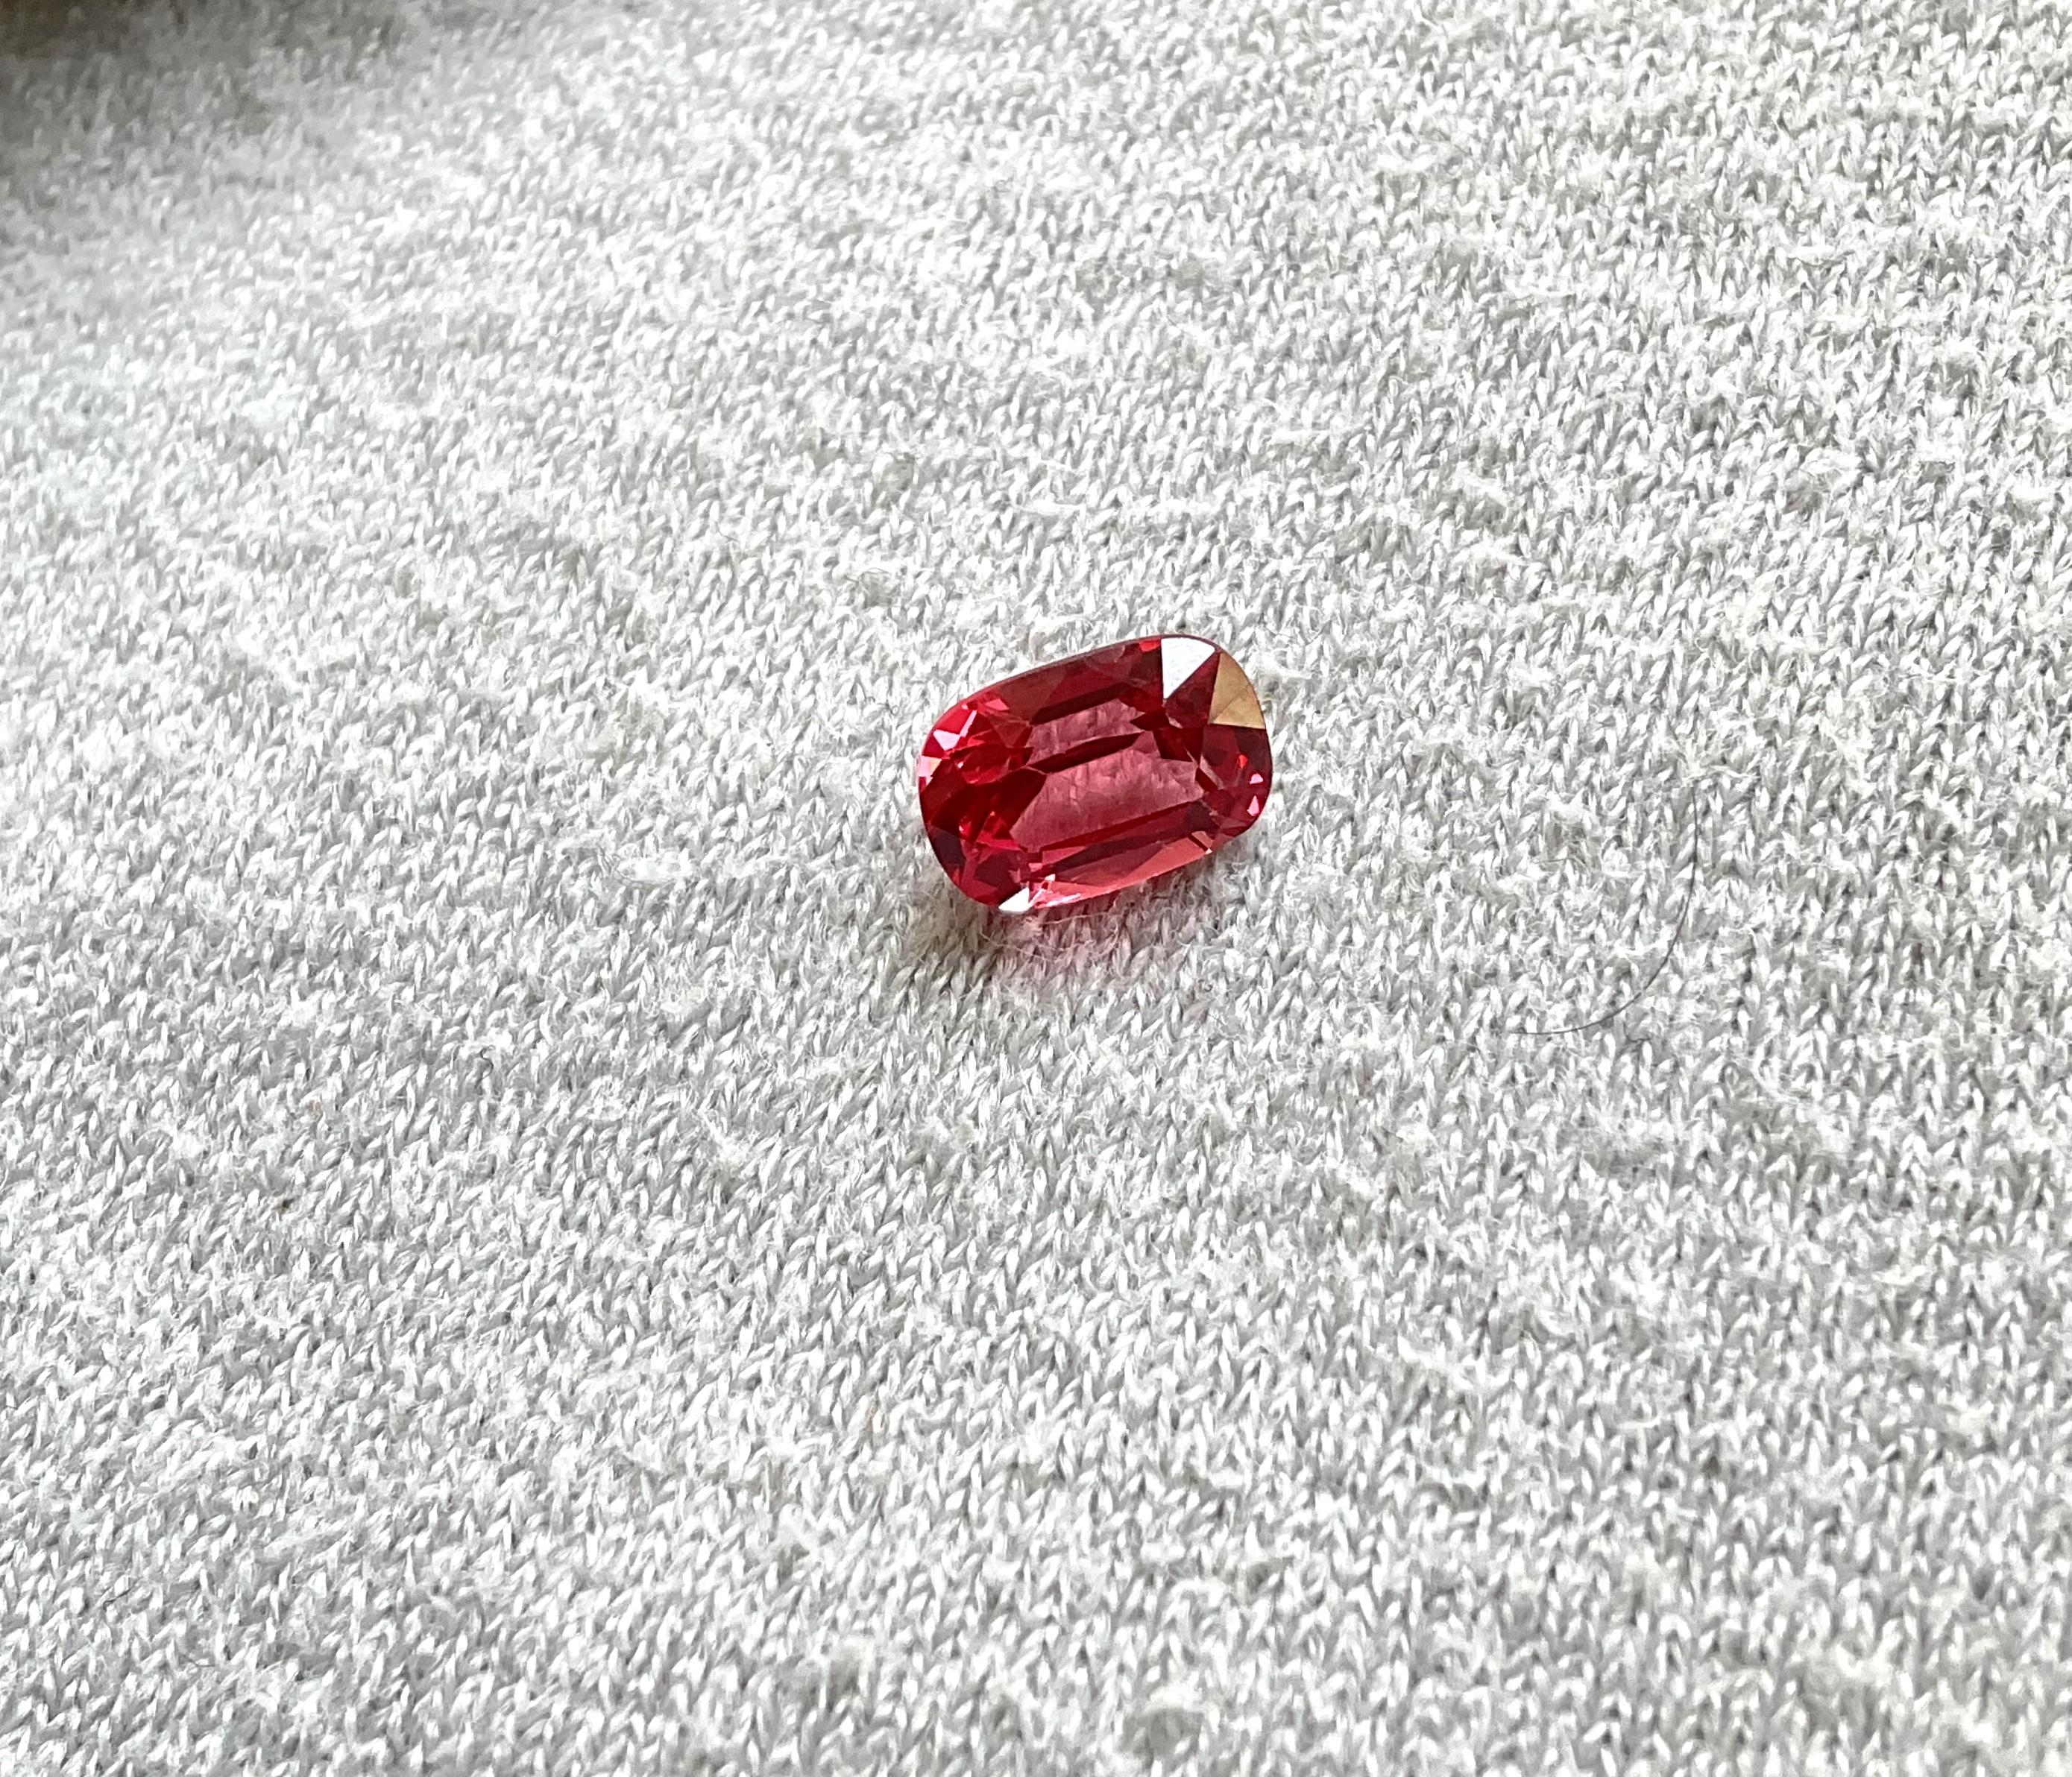 Cushion Cut Certified 1.06 Carat vivid orangy red Burmese spinel cutstone natural gem spinel